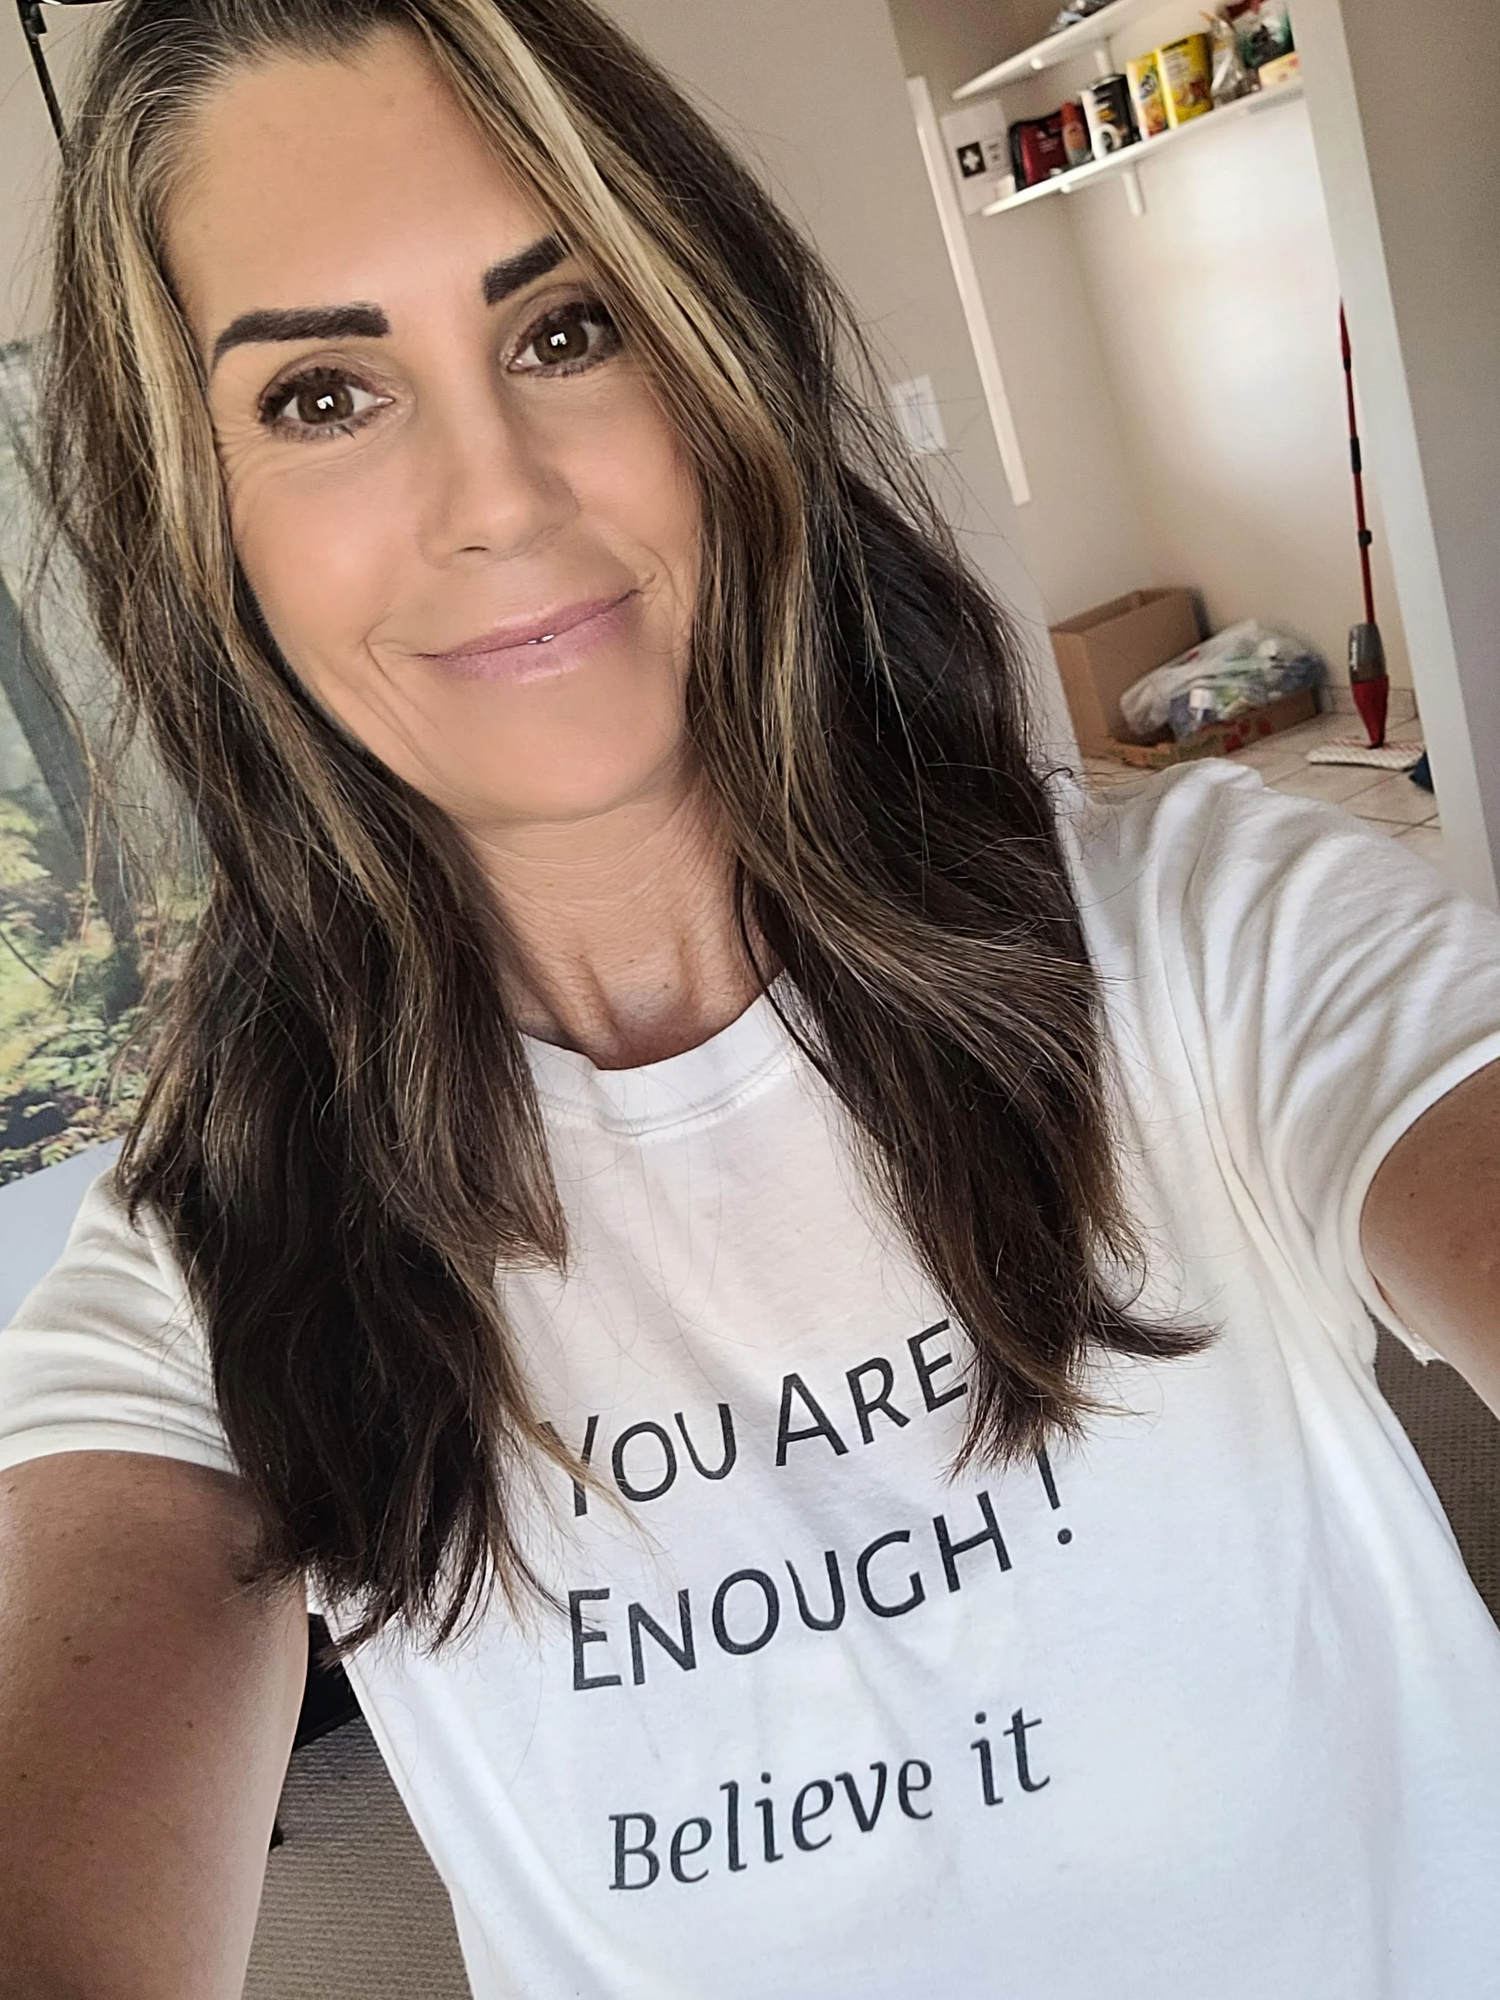 You are Enough! Clothing in many colors